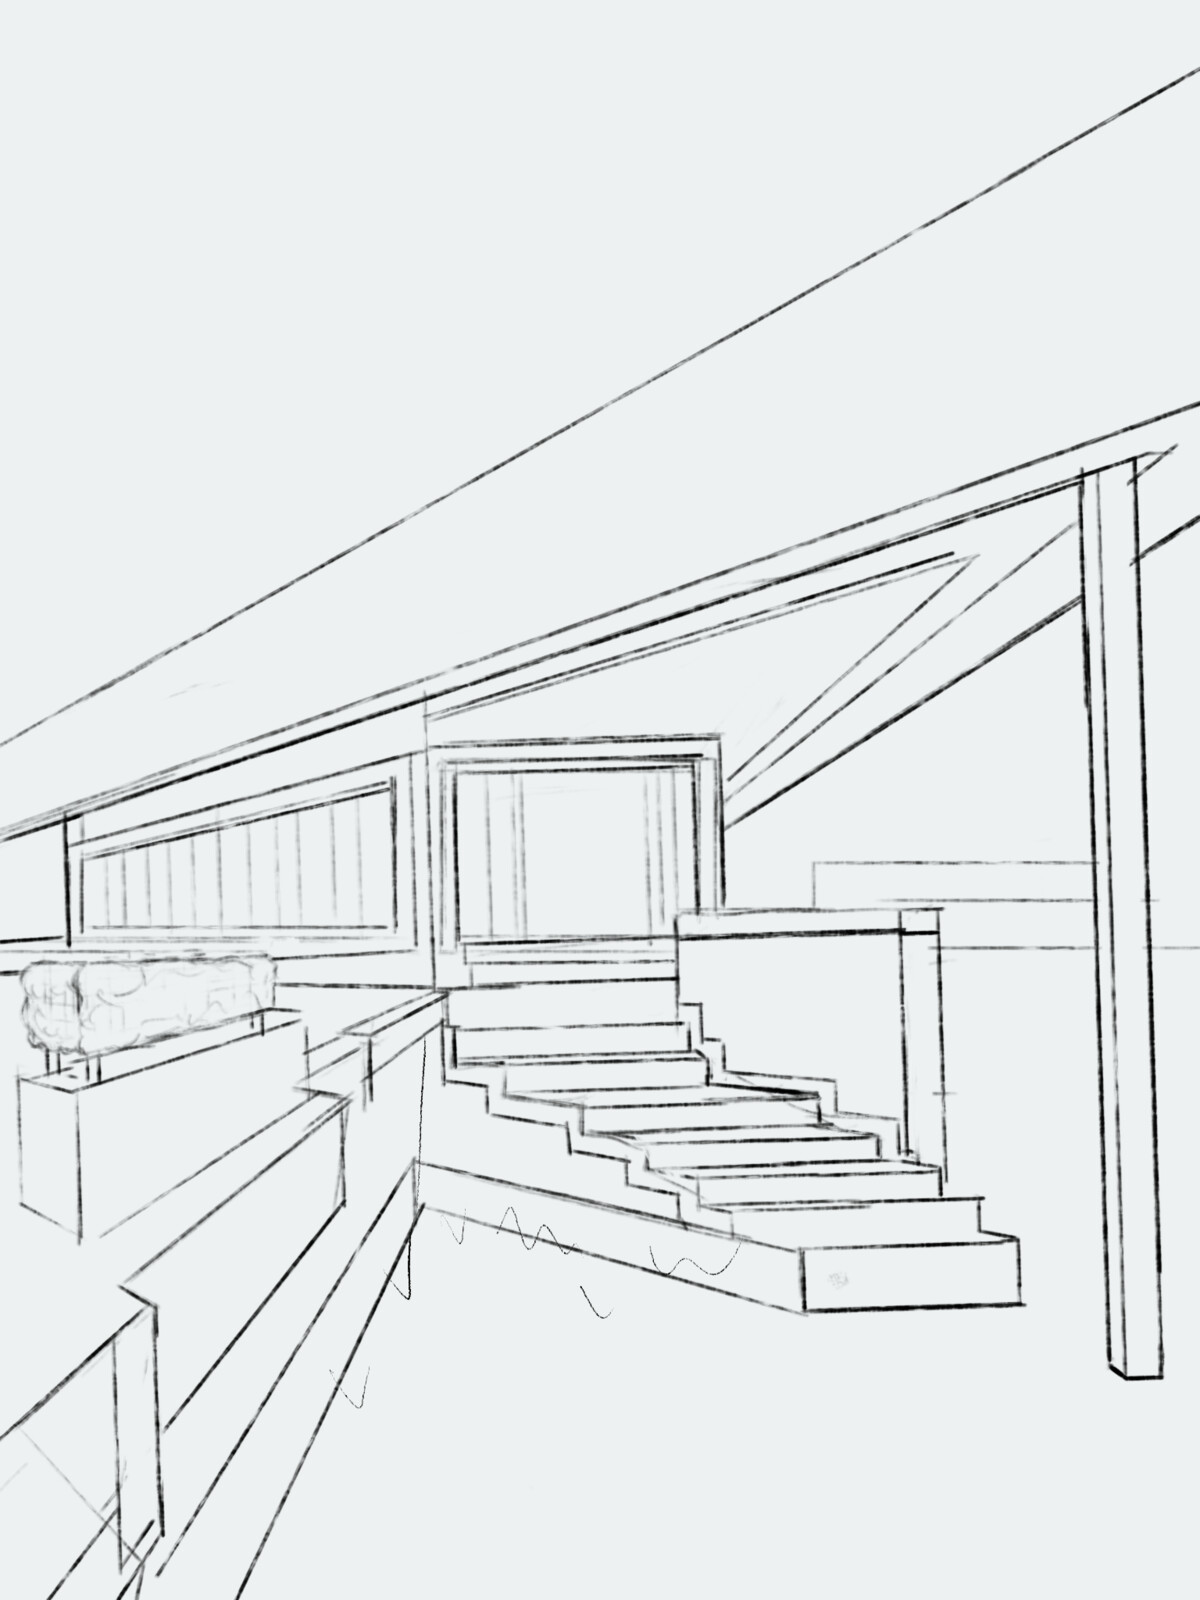 Initial sketch / house design - Inspired by Frank Lloyd Wright's houses - I wanted to establish a claustrophobic feeling in the setting. Lloyd-Wright's sharp edges houses really captured the brutal aesthetic I wanted to go for.